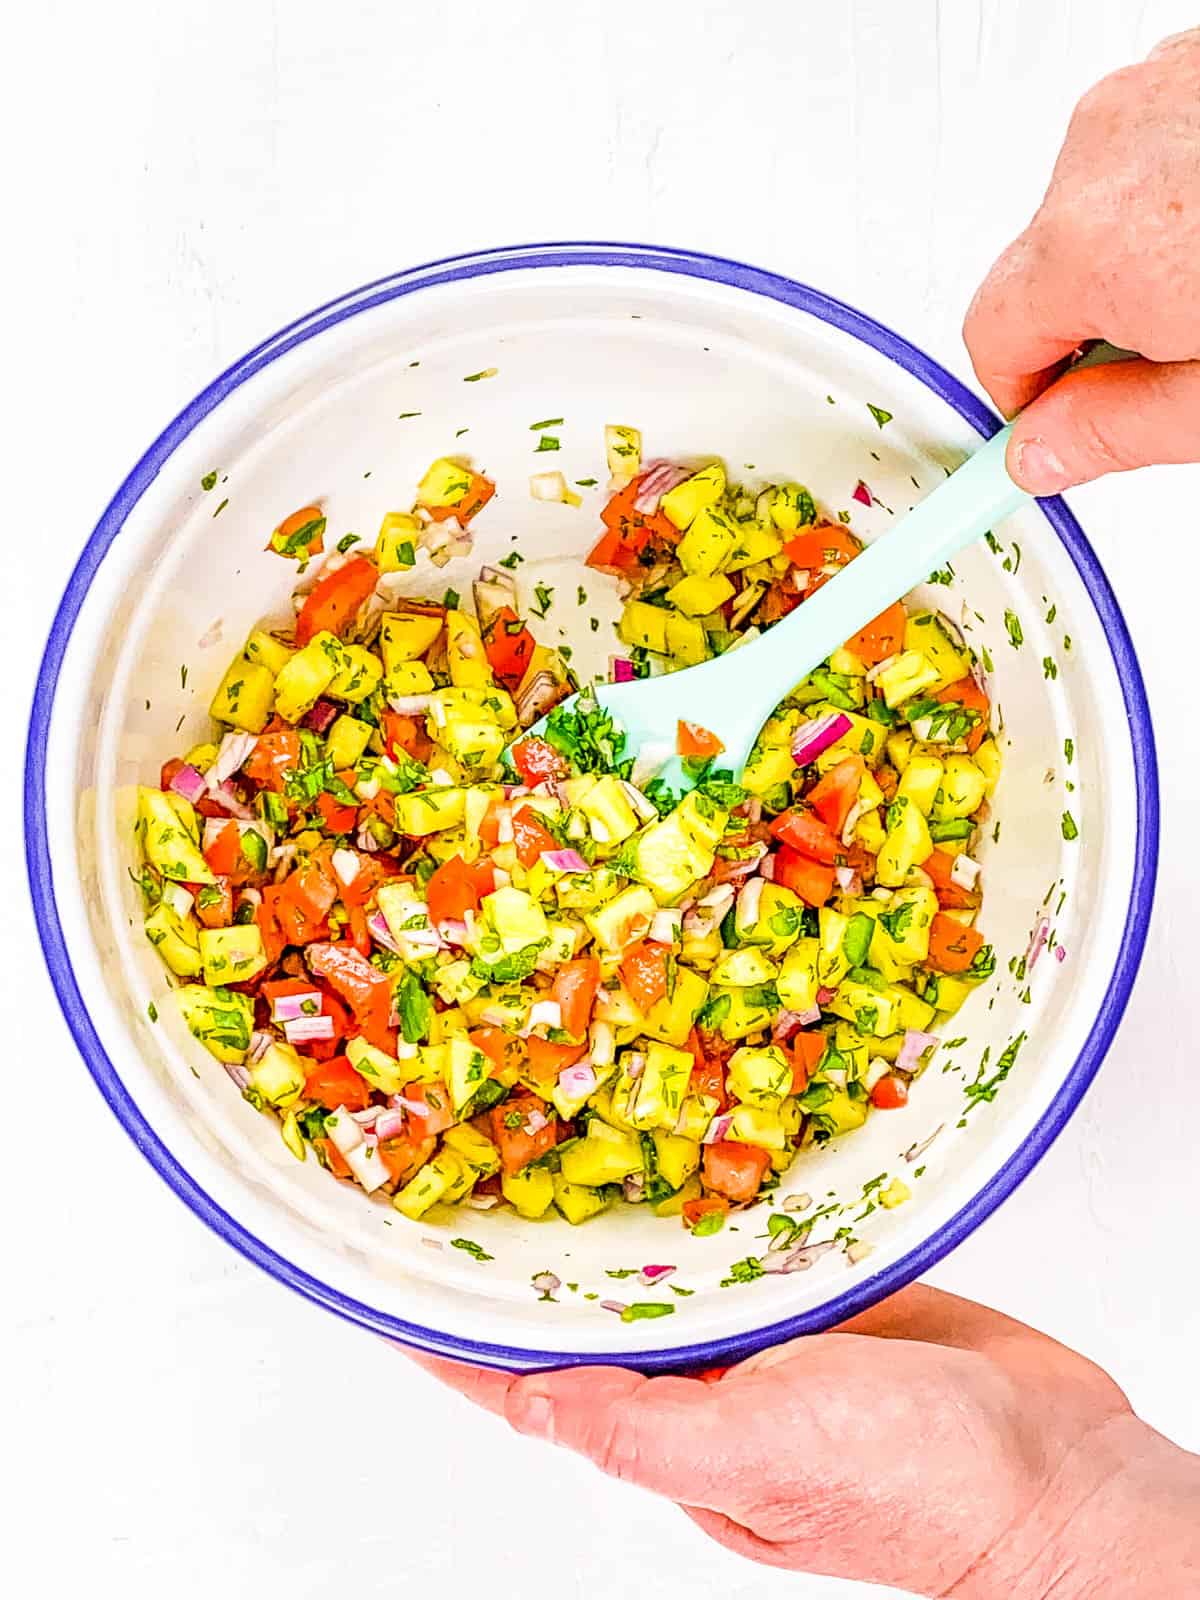 Diced pineapples, onions, tomatoes and jalapenos mixed in a bowl.